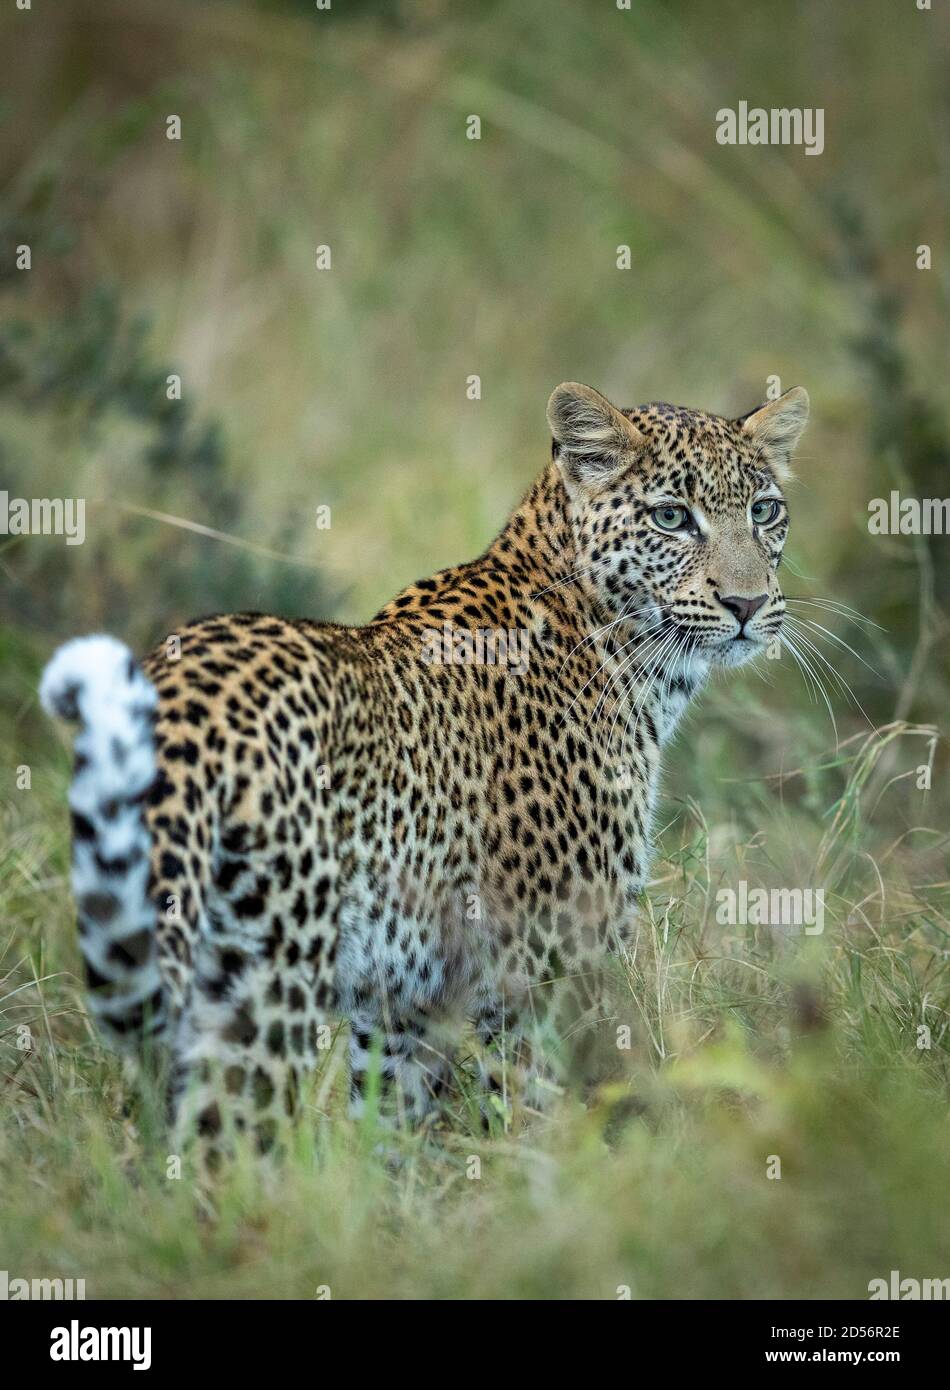 Vertical portrait of an adult leopard with green eyes and long white whiskers in Khwai River Okavango Delta in Botswana Stock Photo